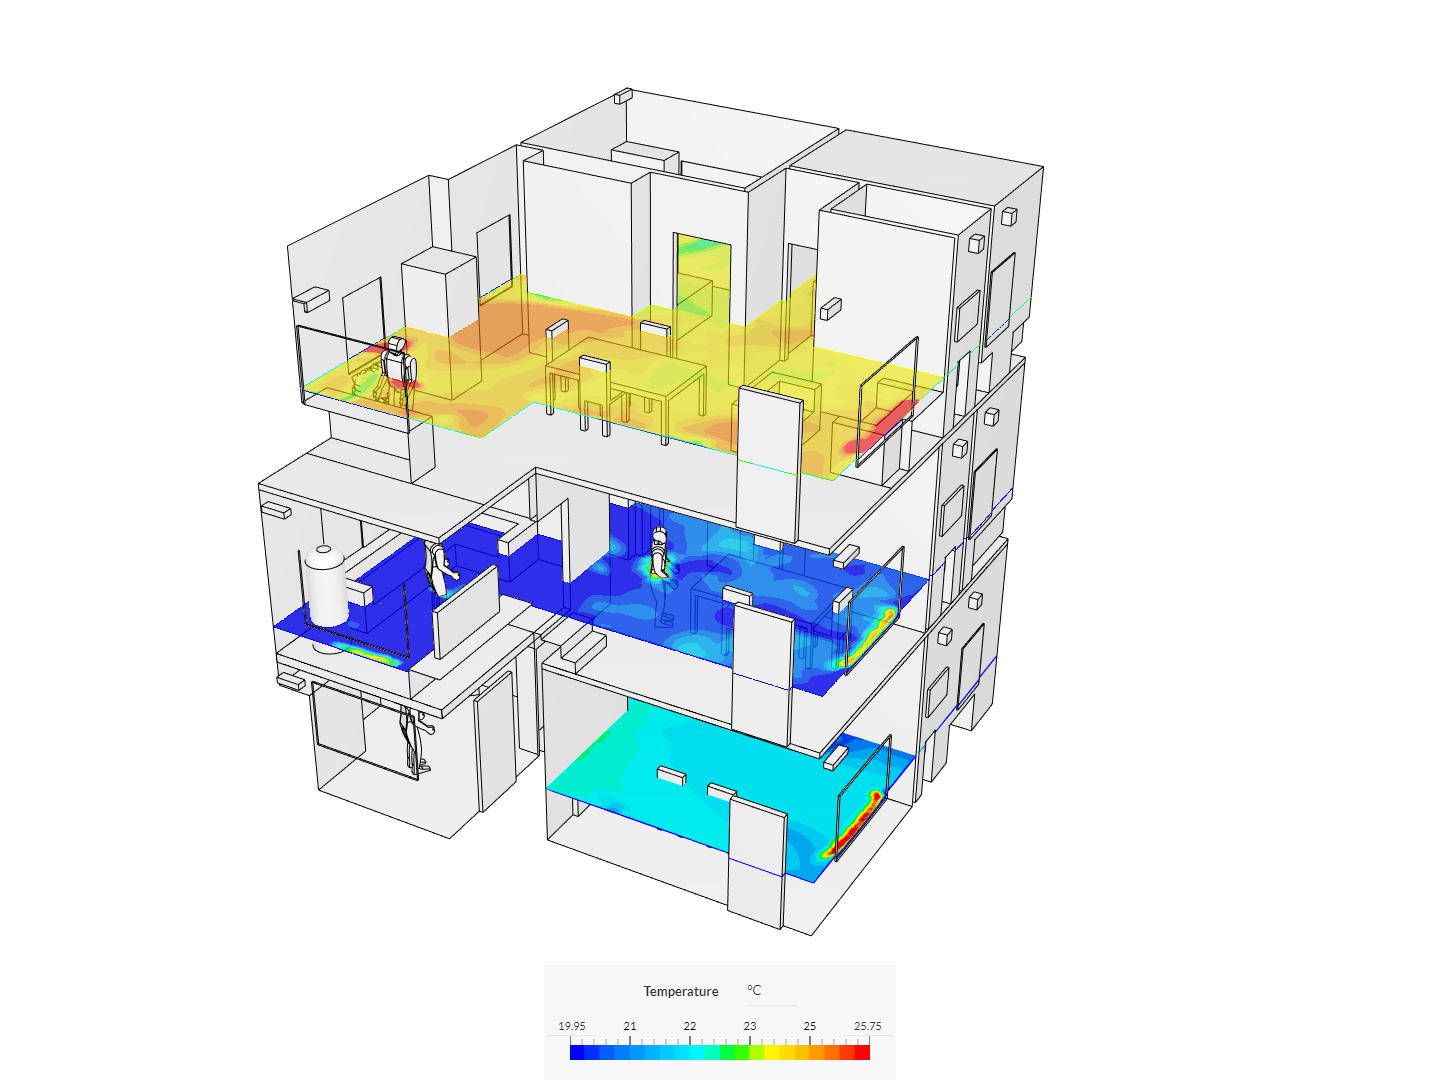 Thermal Comfort Study Example of a building image